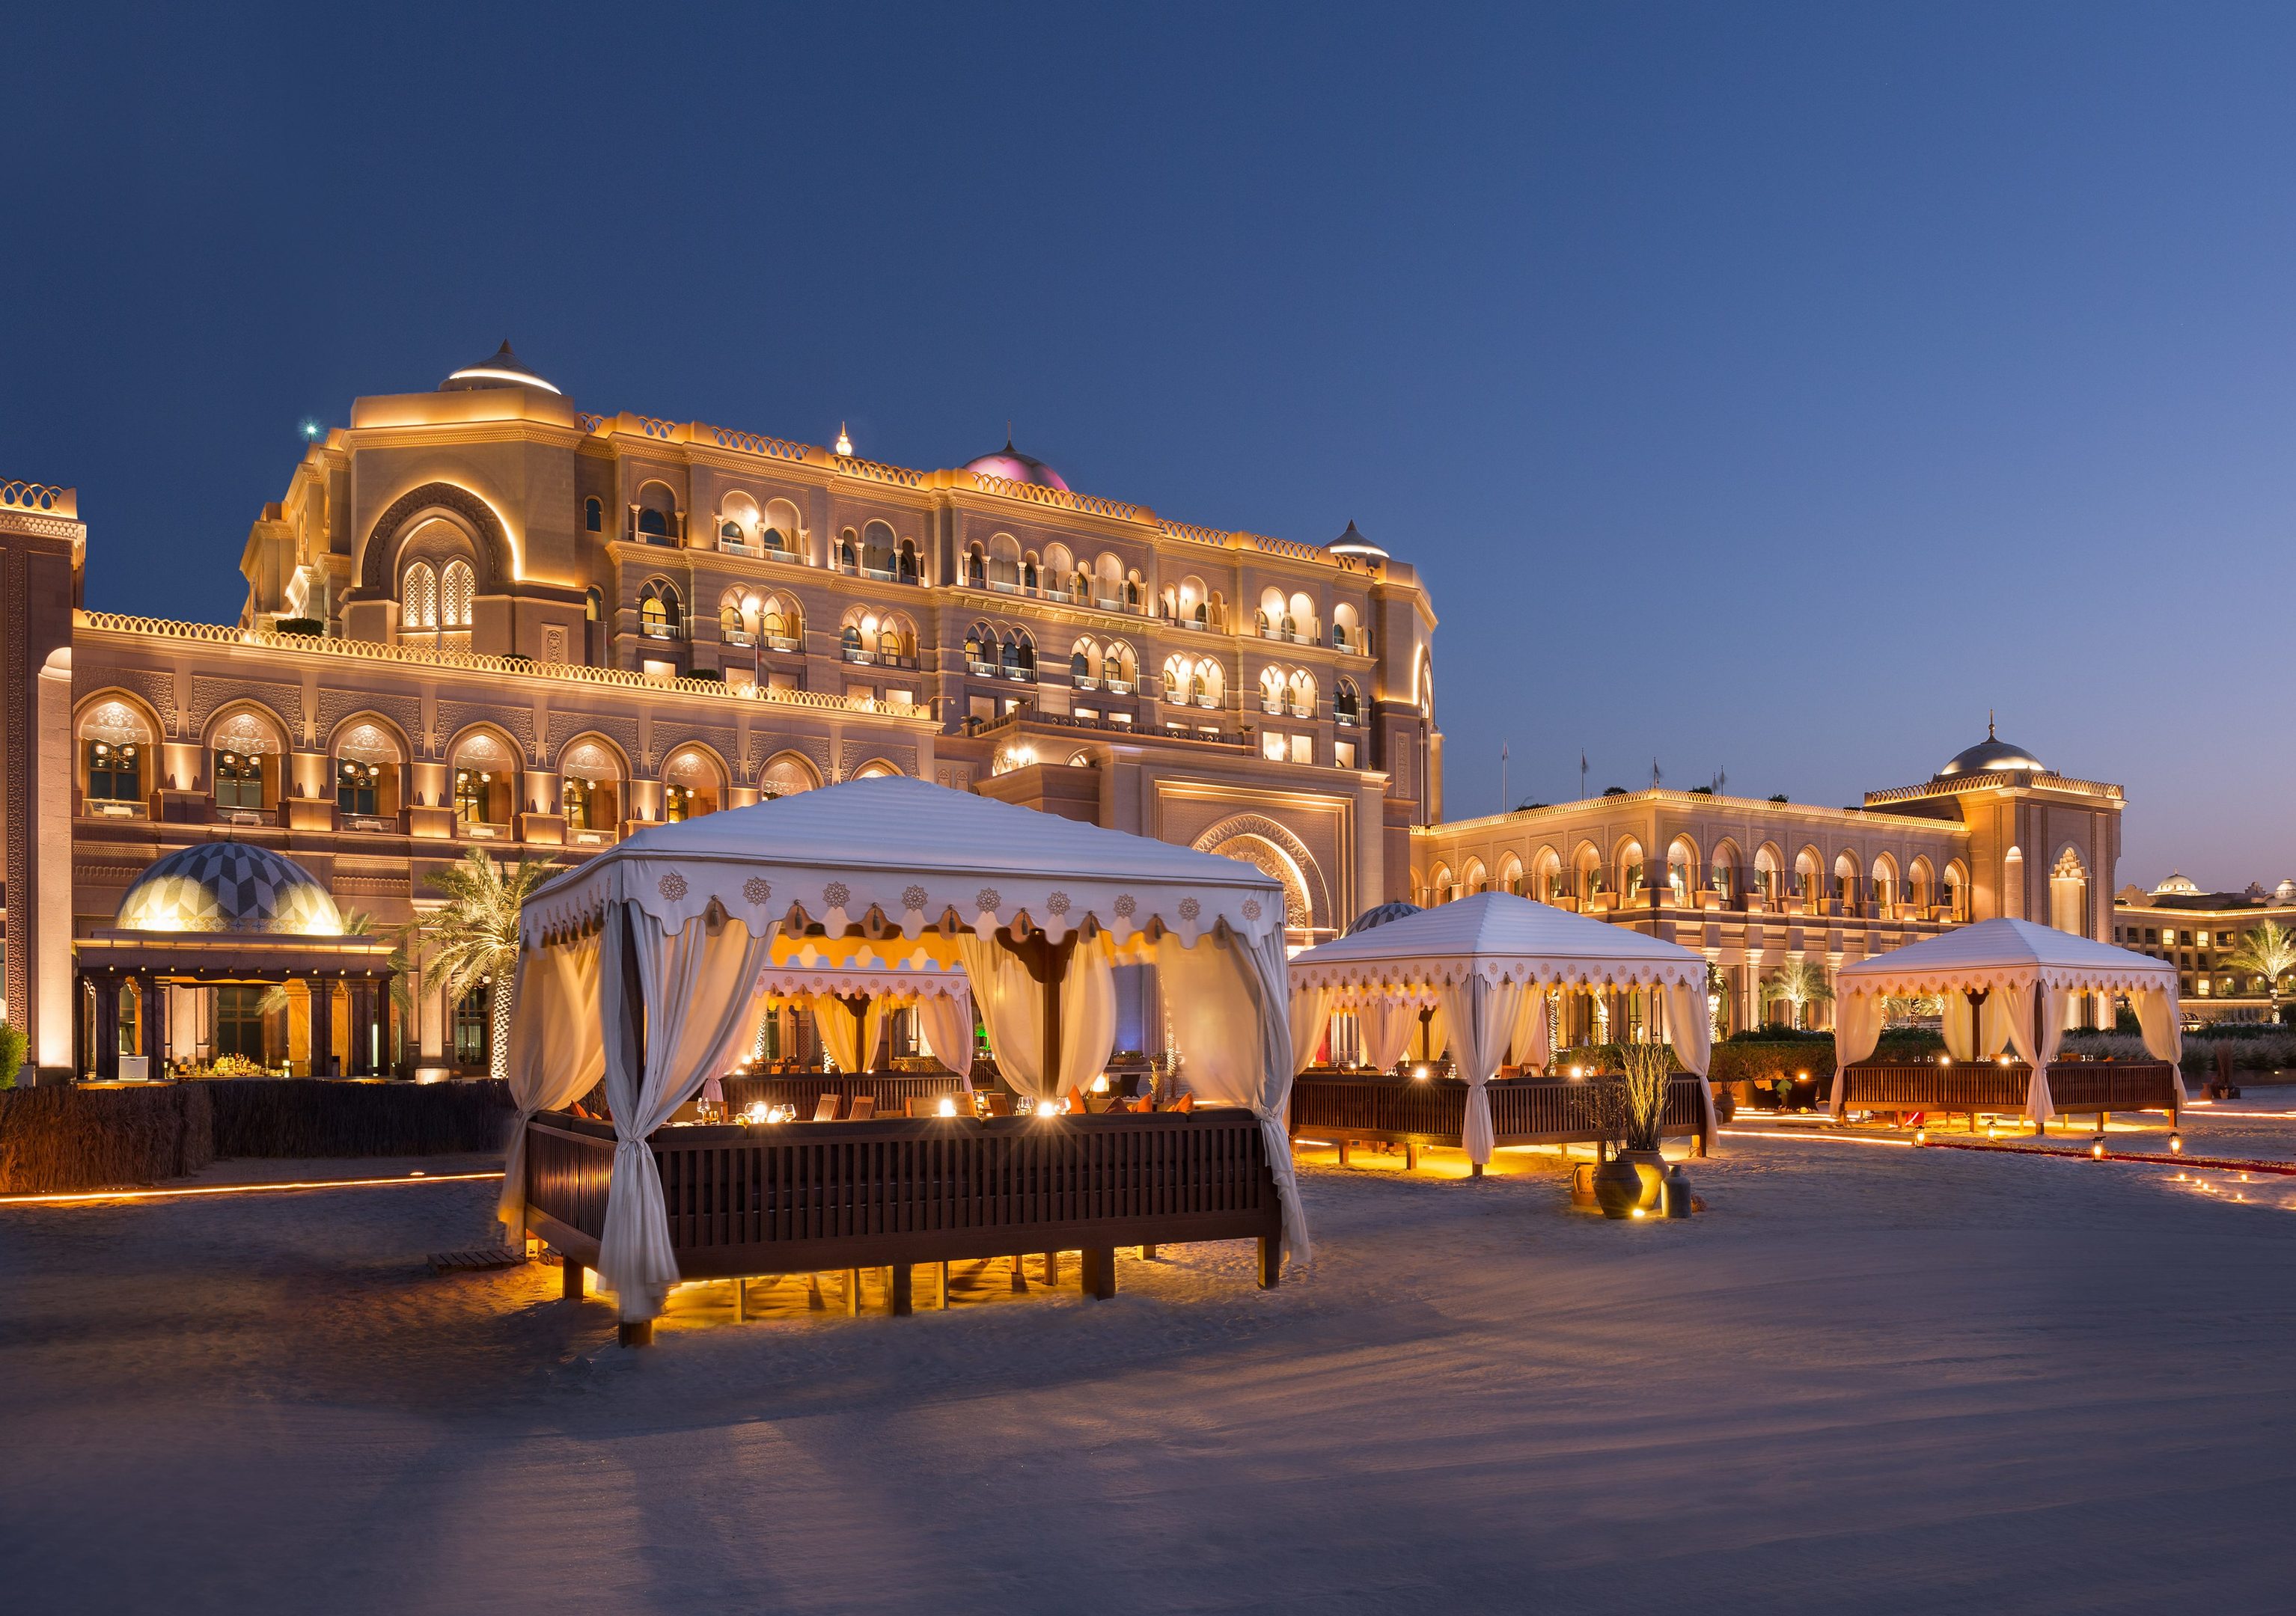 The Emirates Palace is only the second SEVEN star hotel in the world